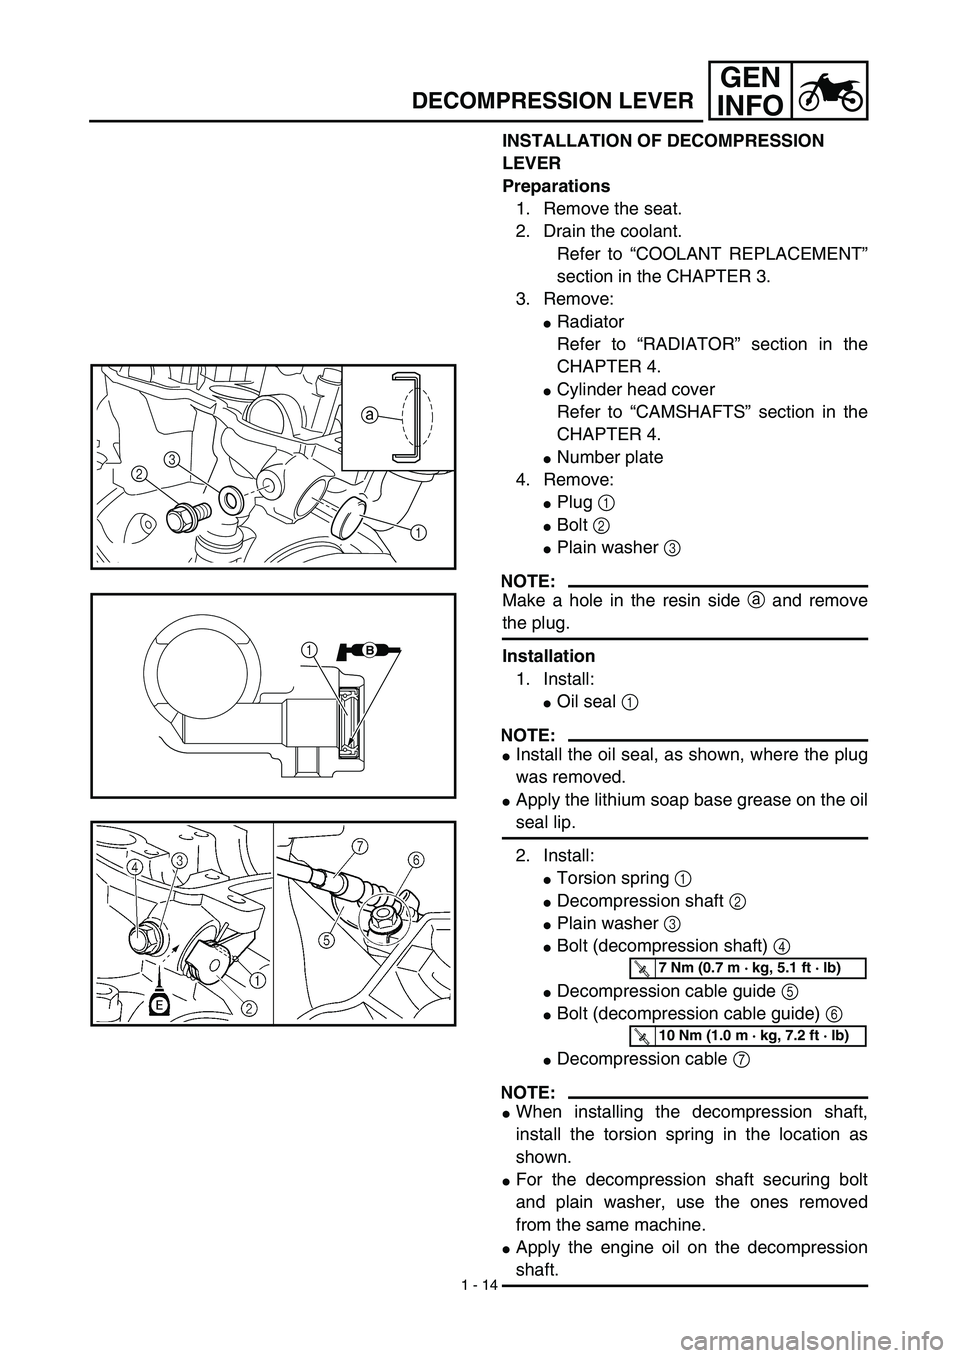 YAMAHA YZ450F 2003  Betriebsanleitungen (in German) 1 - 14
GEN
INFO
DECOMPRESSION LEVER
INSTALLATION OF DECOMPRESSION 
LEVER
Preparations
1. Remove the seat.
2. Drain the coolant.
Refer to “COOLANT REPLACEMENT”
section in the CHAPTER 3.
3. Remove:
